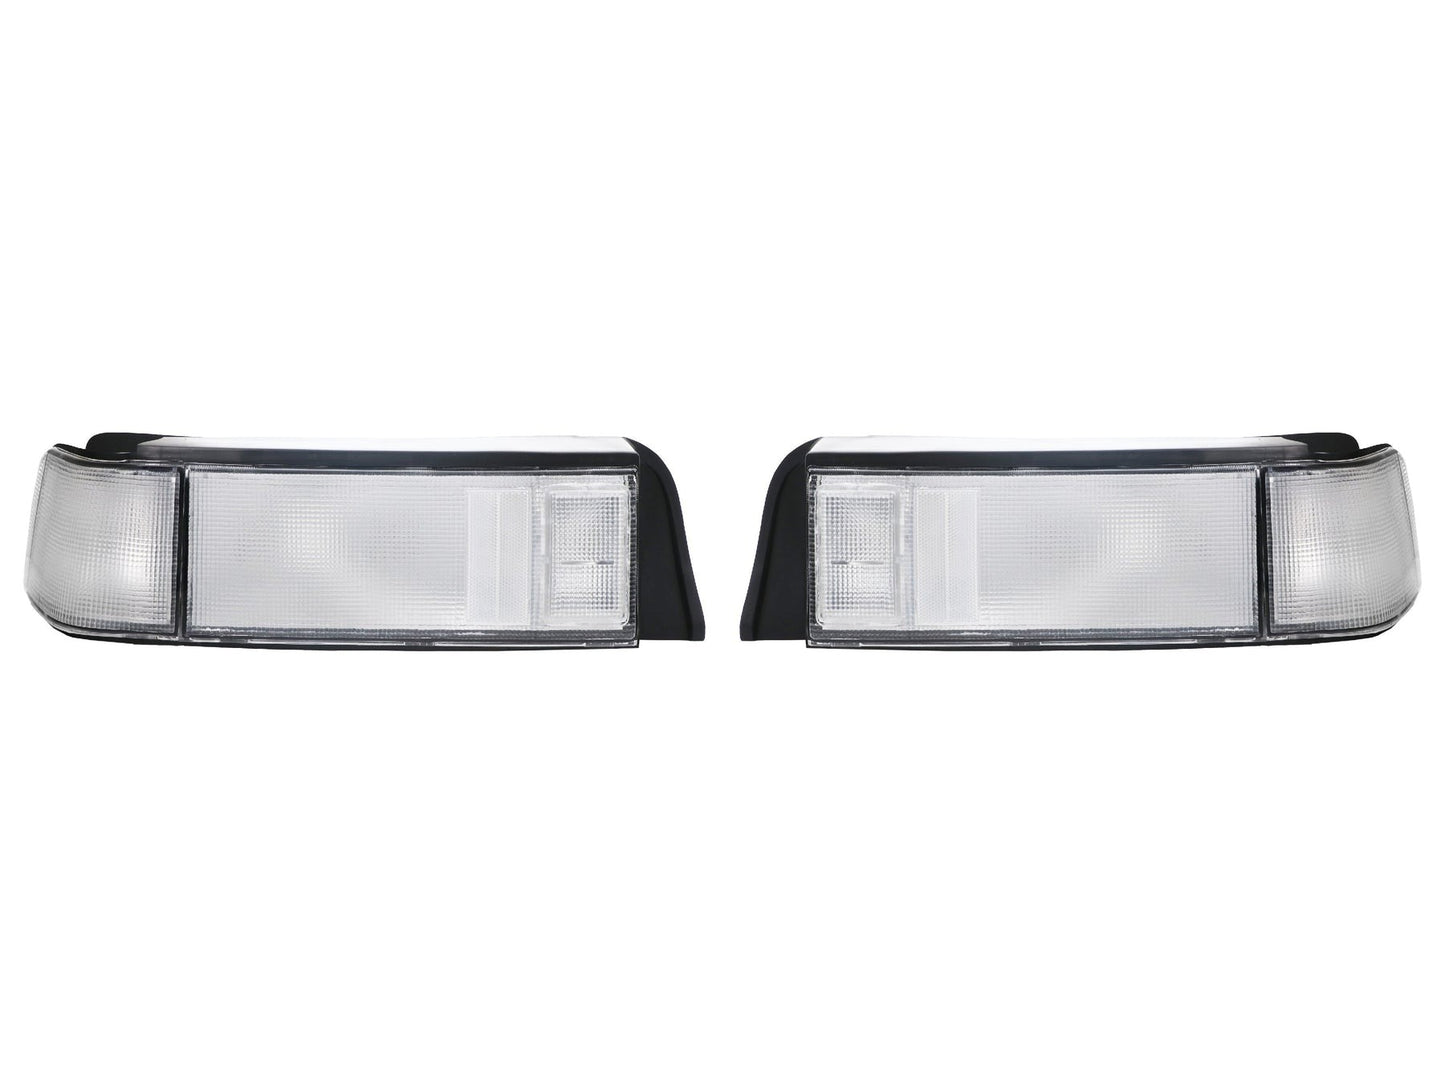 1988-1991 Honda Civic 3D Hatch Si JDM SiR Style ALL CLEAR 3PC Tail Light + Civic Decal - Made by DEPO